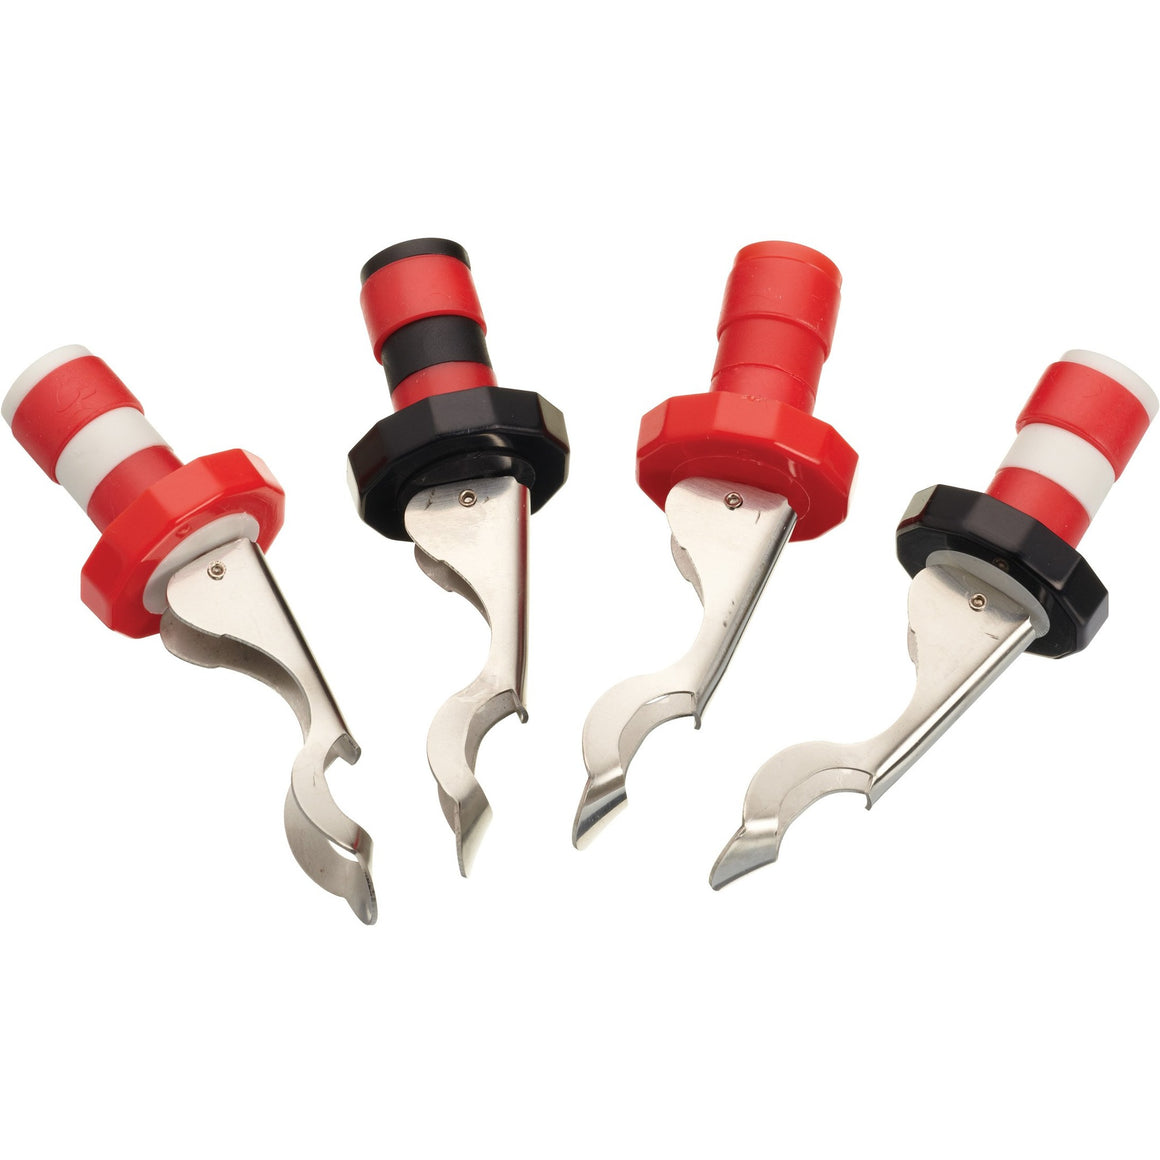 KitchenCraft Lever Bottle Stoppers